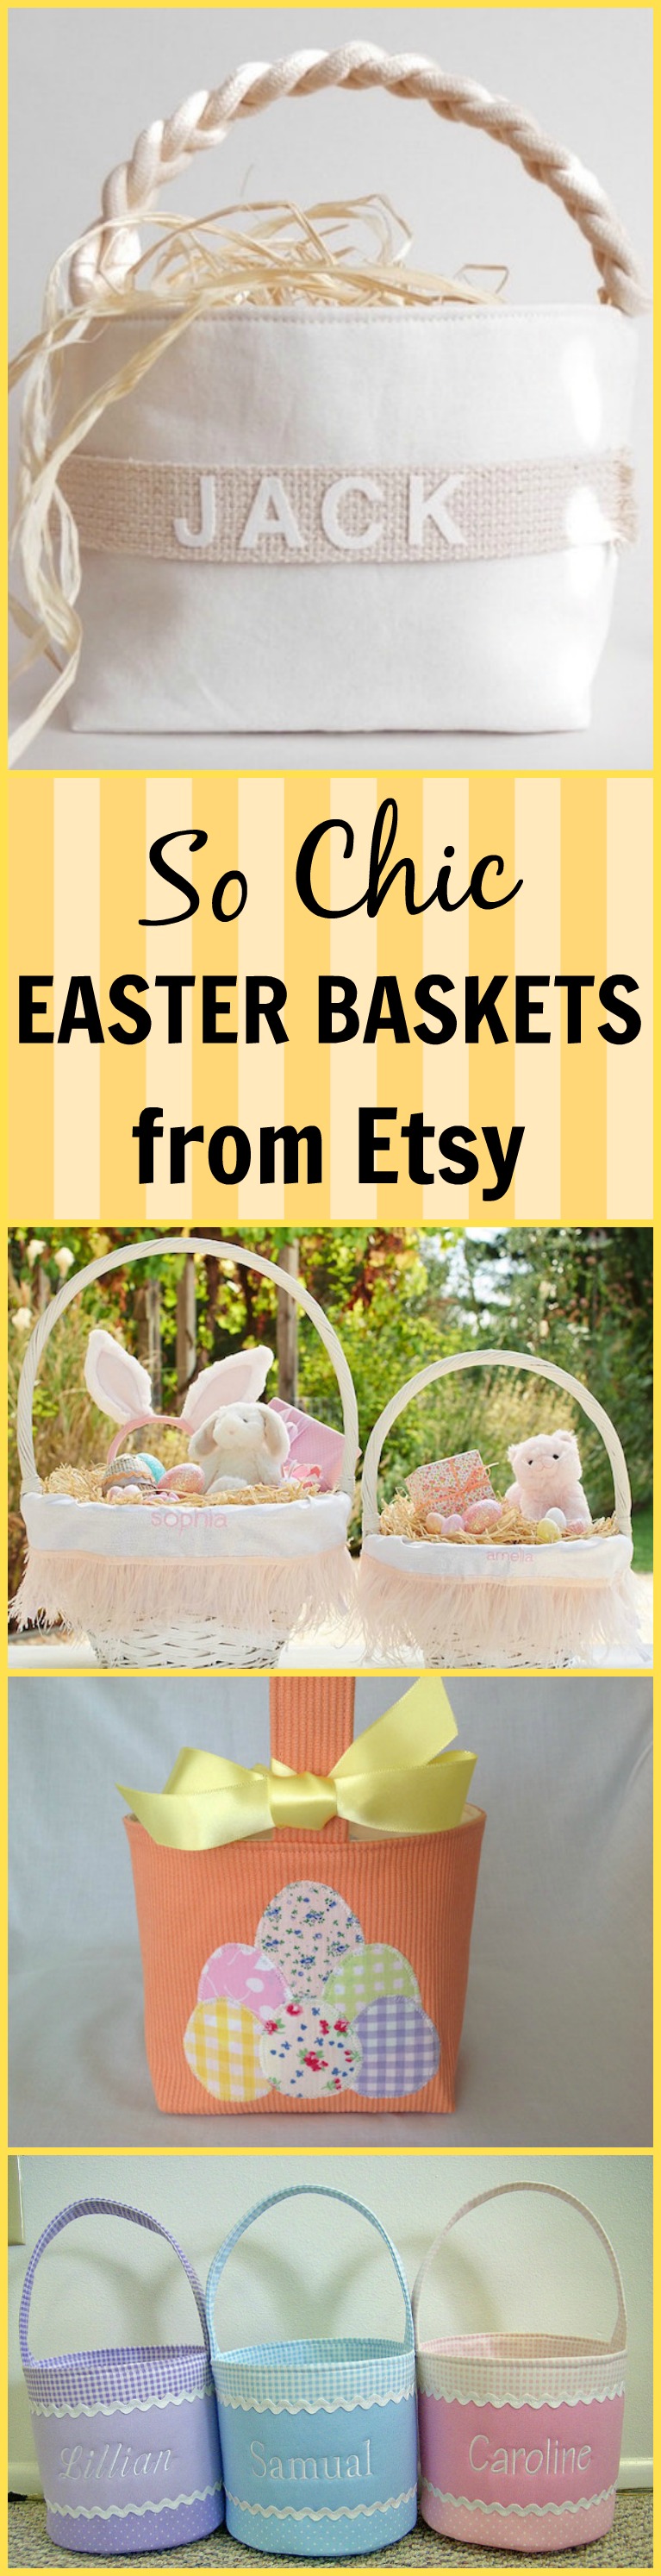 Chic Easter Baskets